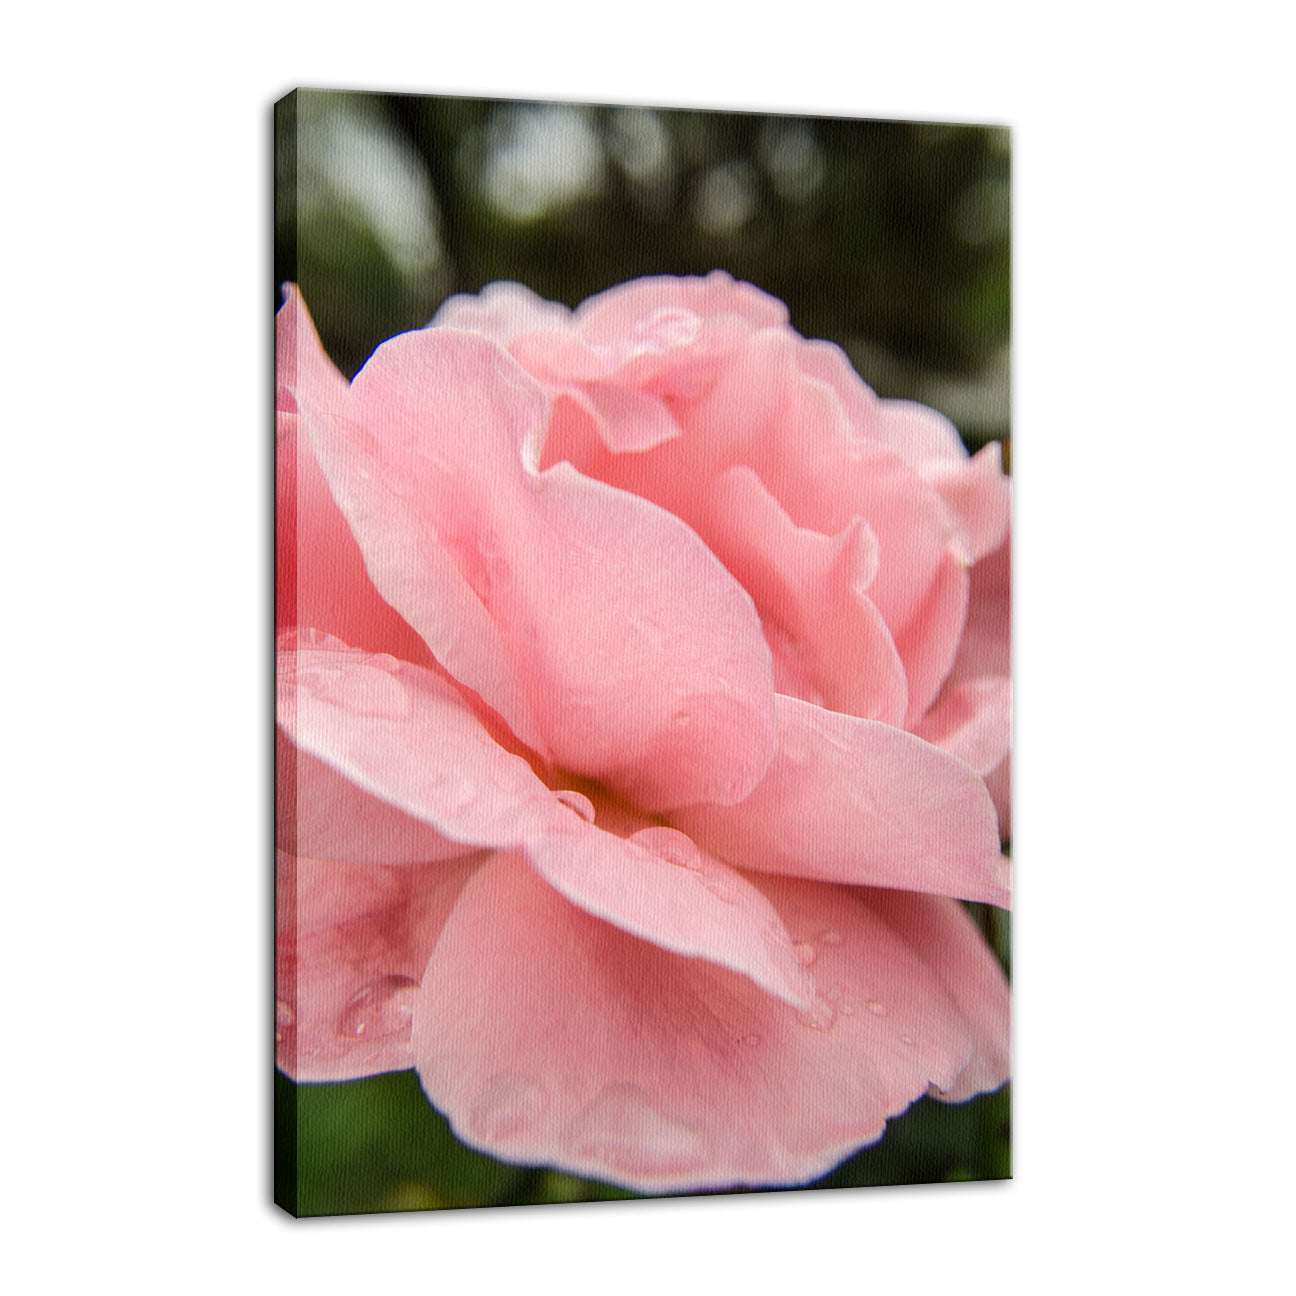 Pink Passion Nature / Floral Photo Fine Art Canvas Wall Art Prints  - PIPAFINEART